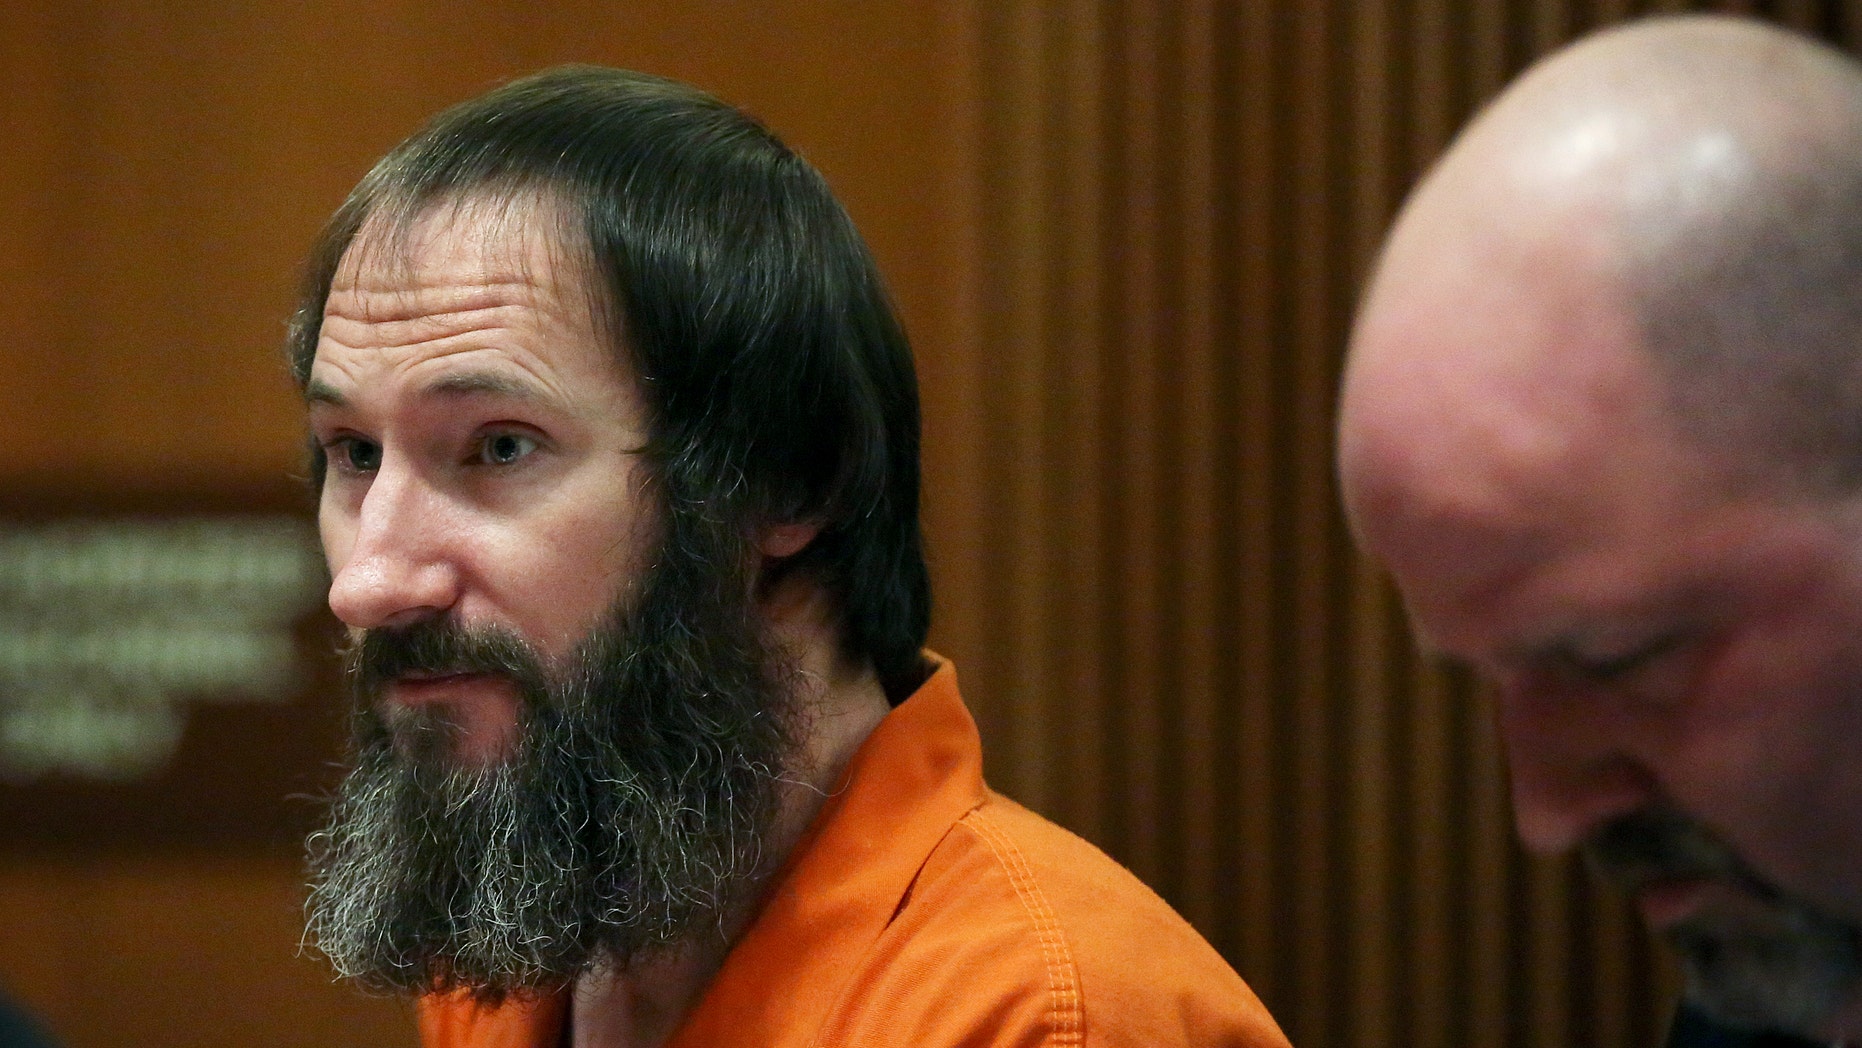 Johnny Bobbitt is in the courtroom at the sentencing hearing at the Burlington County Superior Court in Mount Holly, New Jersey on Friday, April 12, 2019. Bobbitt, l Homeless veteran who admitted to conspiring with a New Jersey couple in a GoFundMe scam that raised more than $ 400,000, was sentenced Friday to five years of probation.